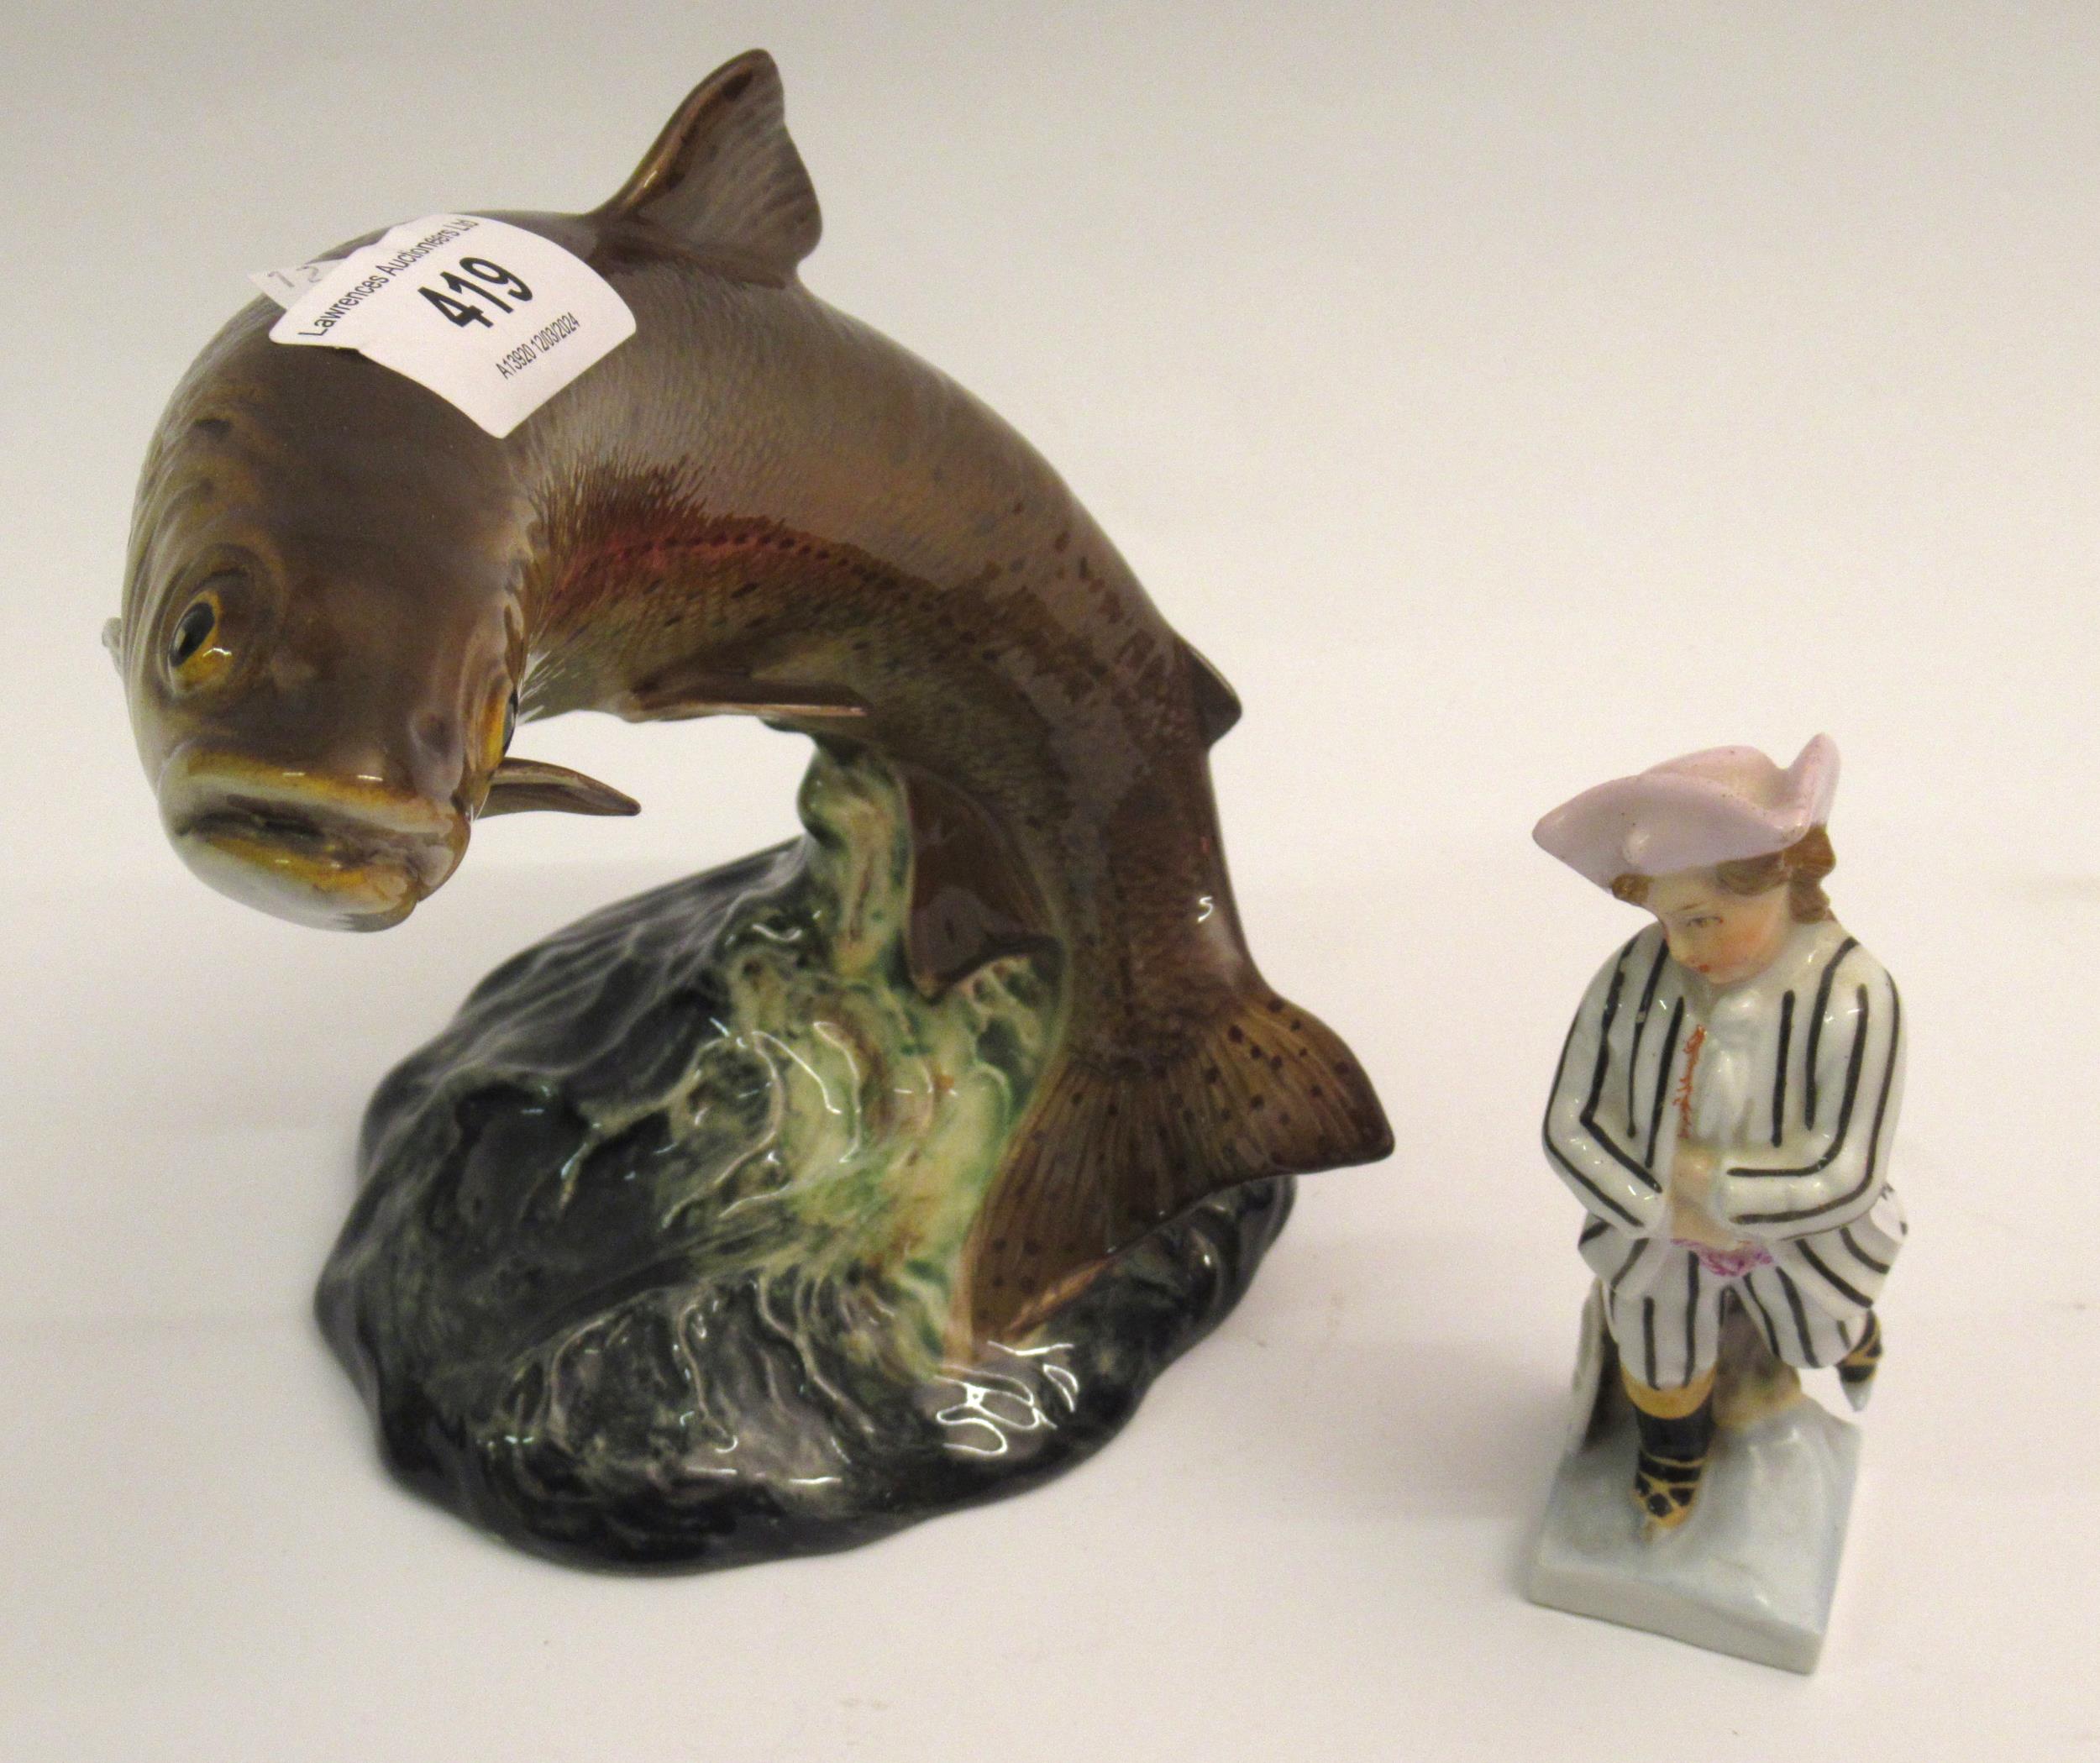 Beswick figure of a leaping trout, No. 1032 together with a small Continental porcelain figure of